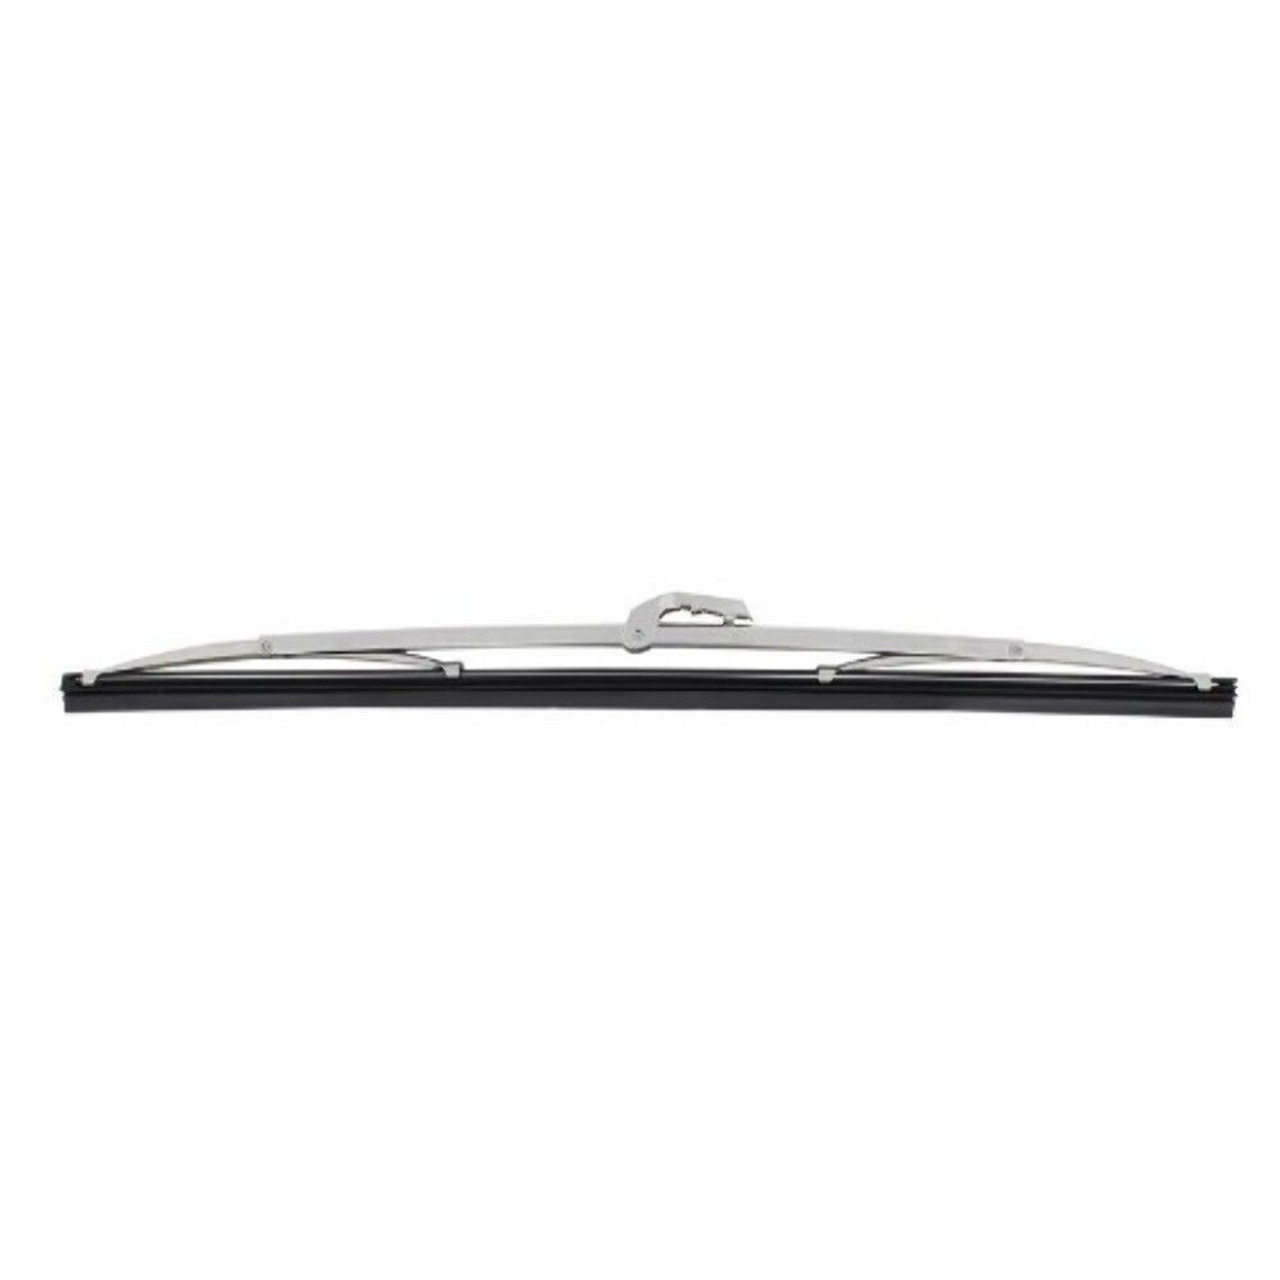 13" Polished Stainless Steel Wiper Blade - Bayonet Type